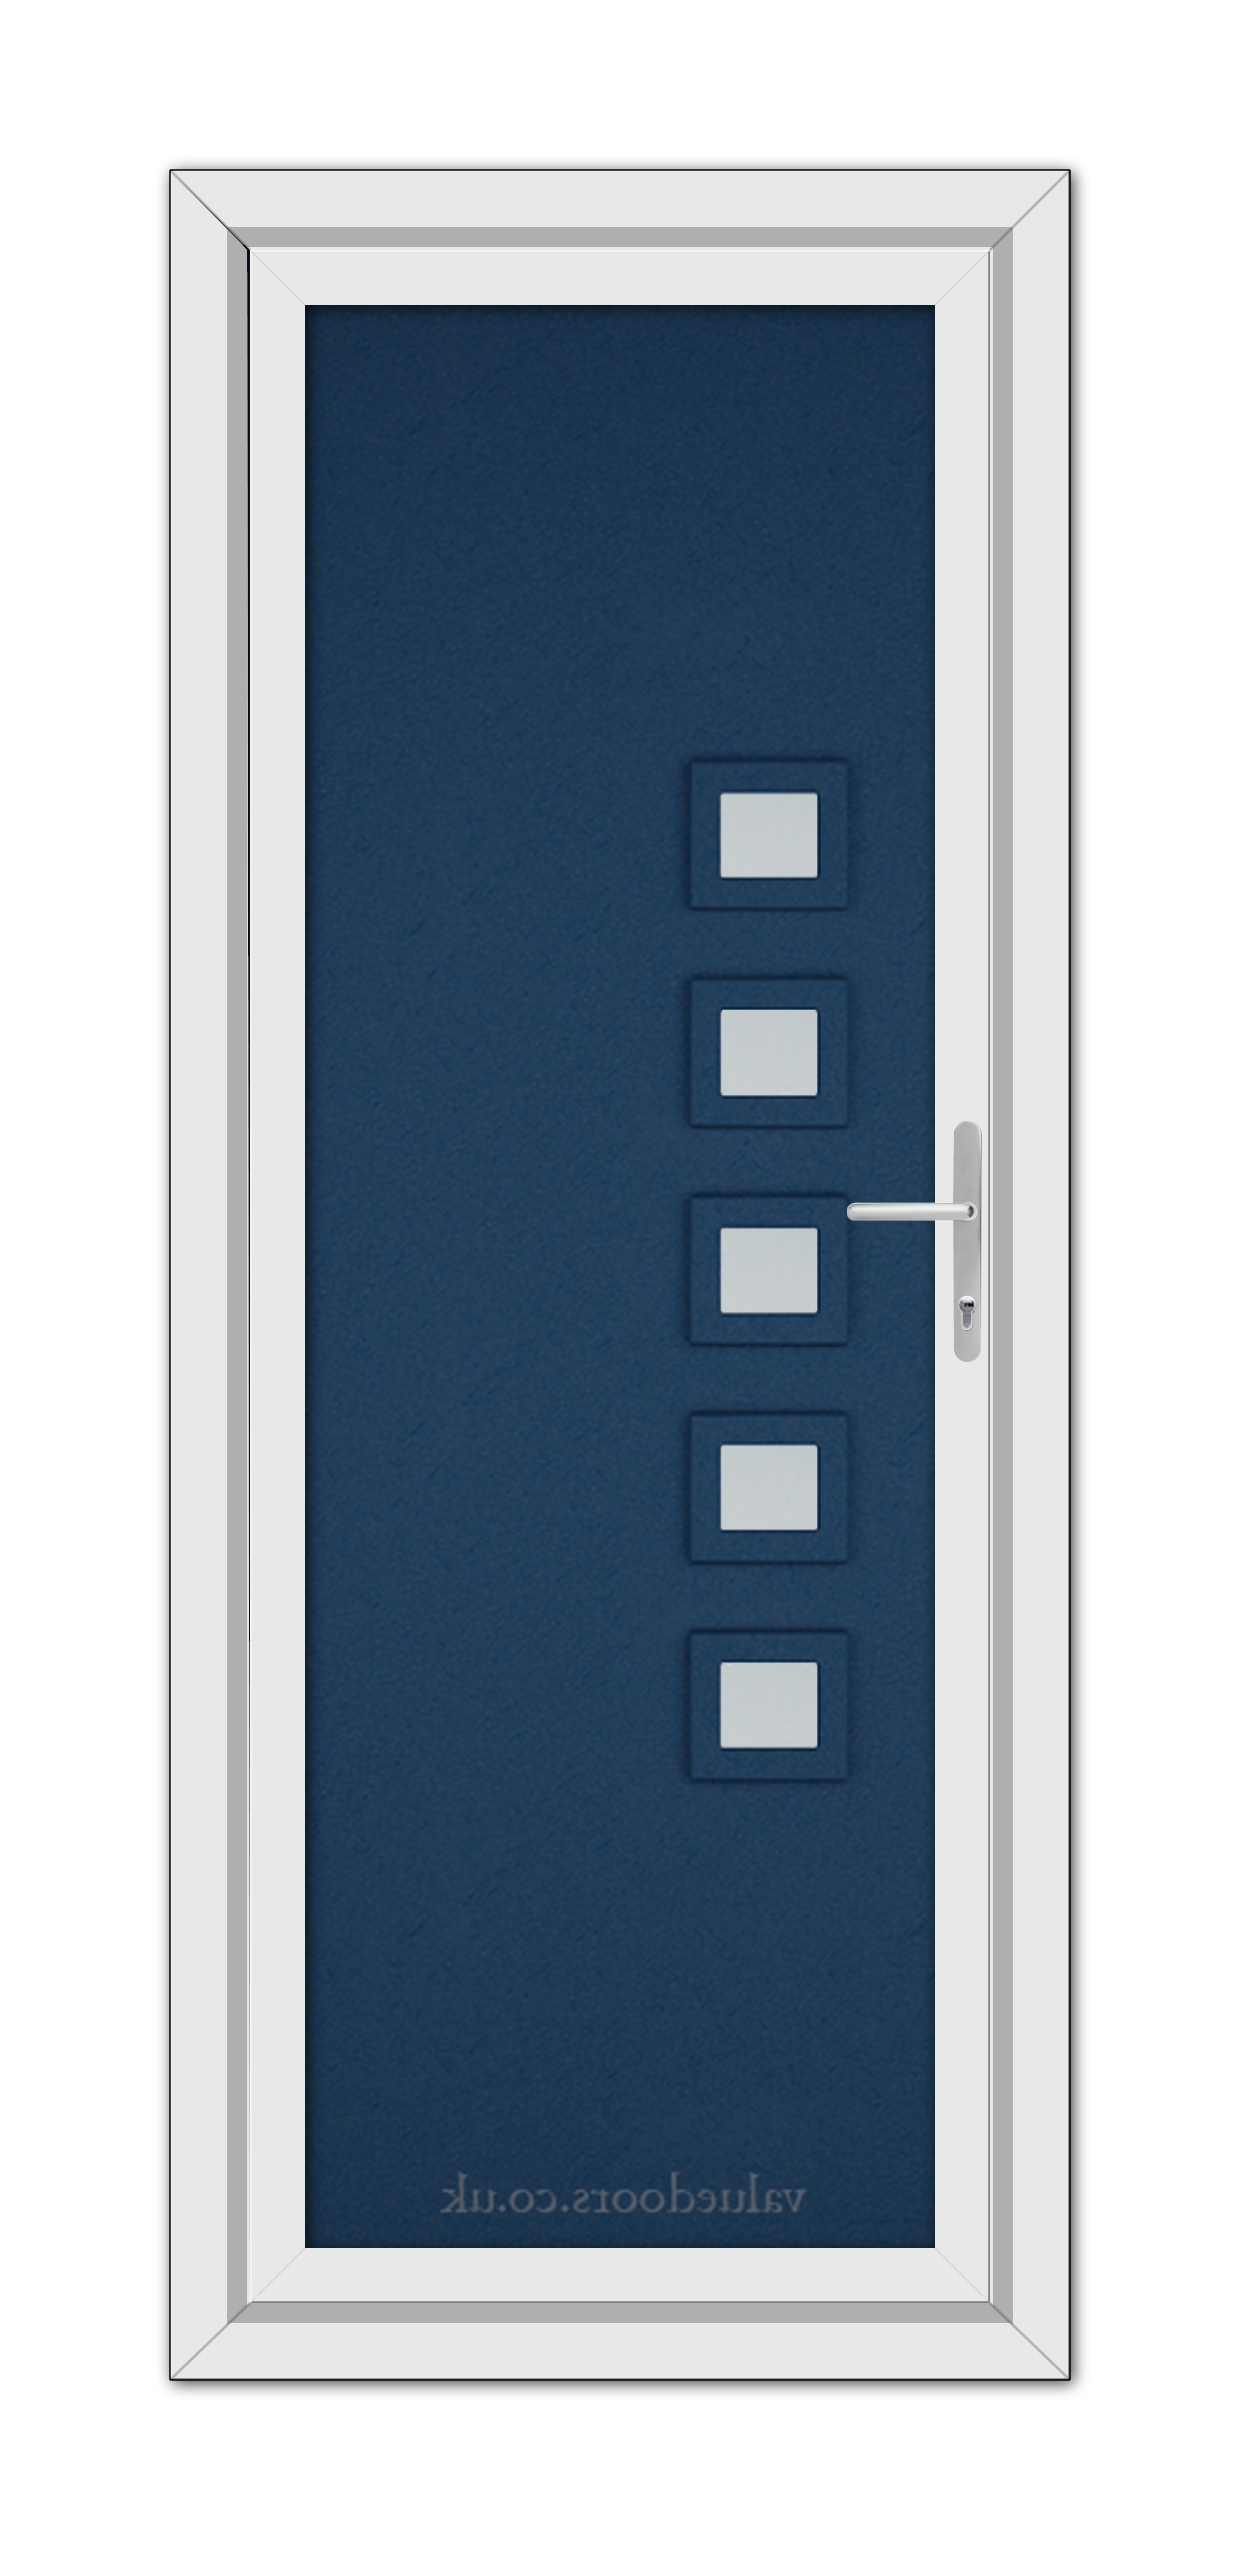 Vertical Blue Malaga uPVC Door with six small square windows arranged in a column, white doorframe, and a handle on the right.